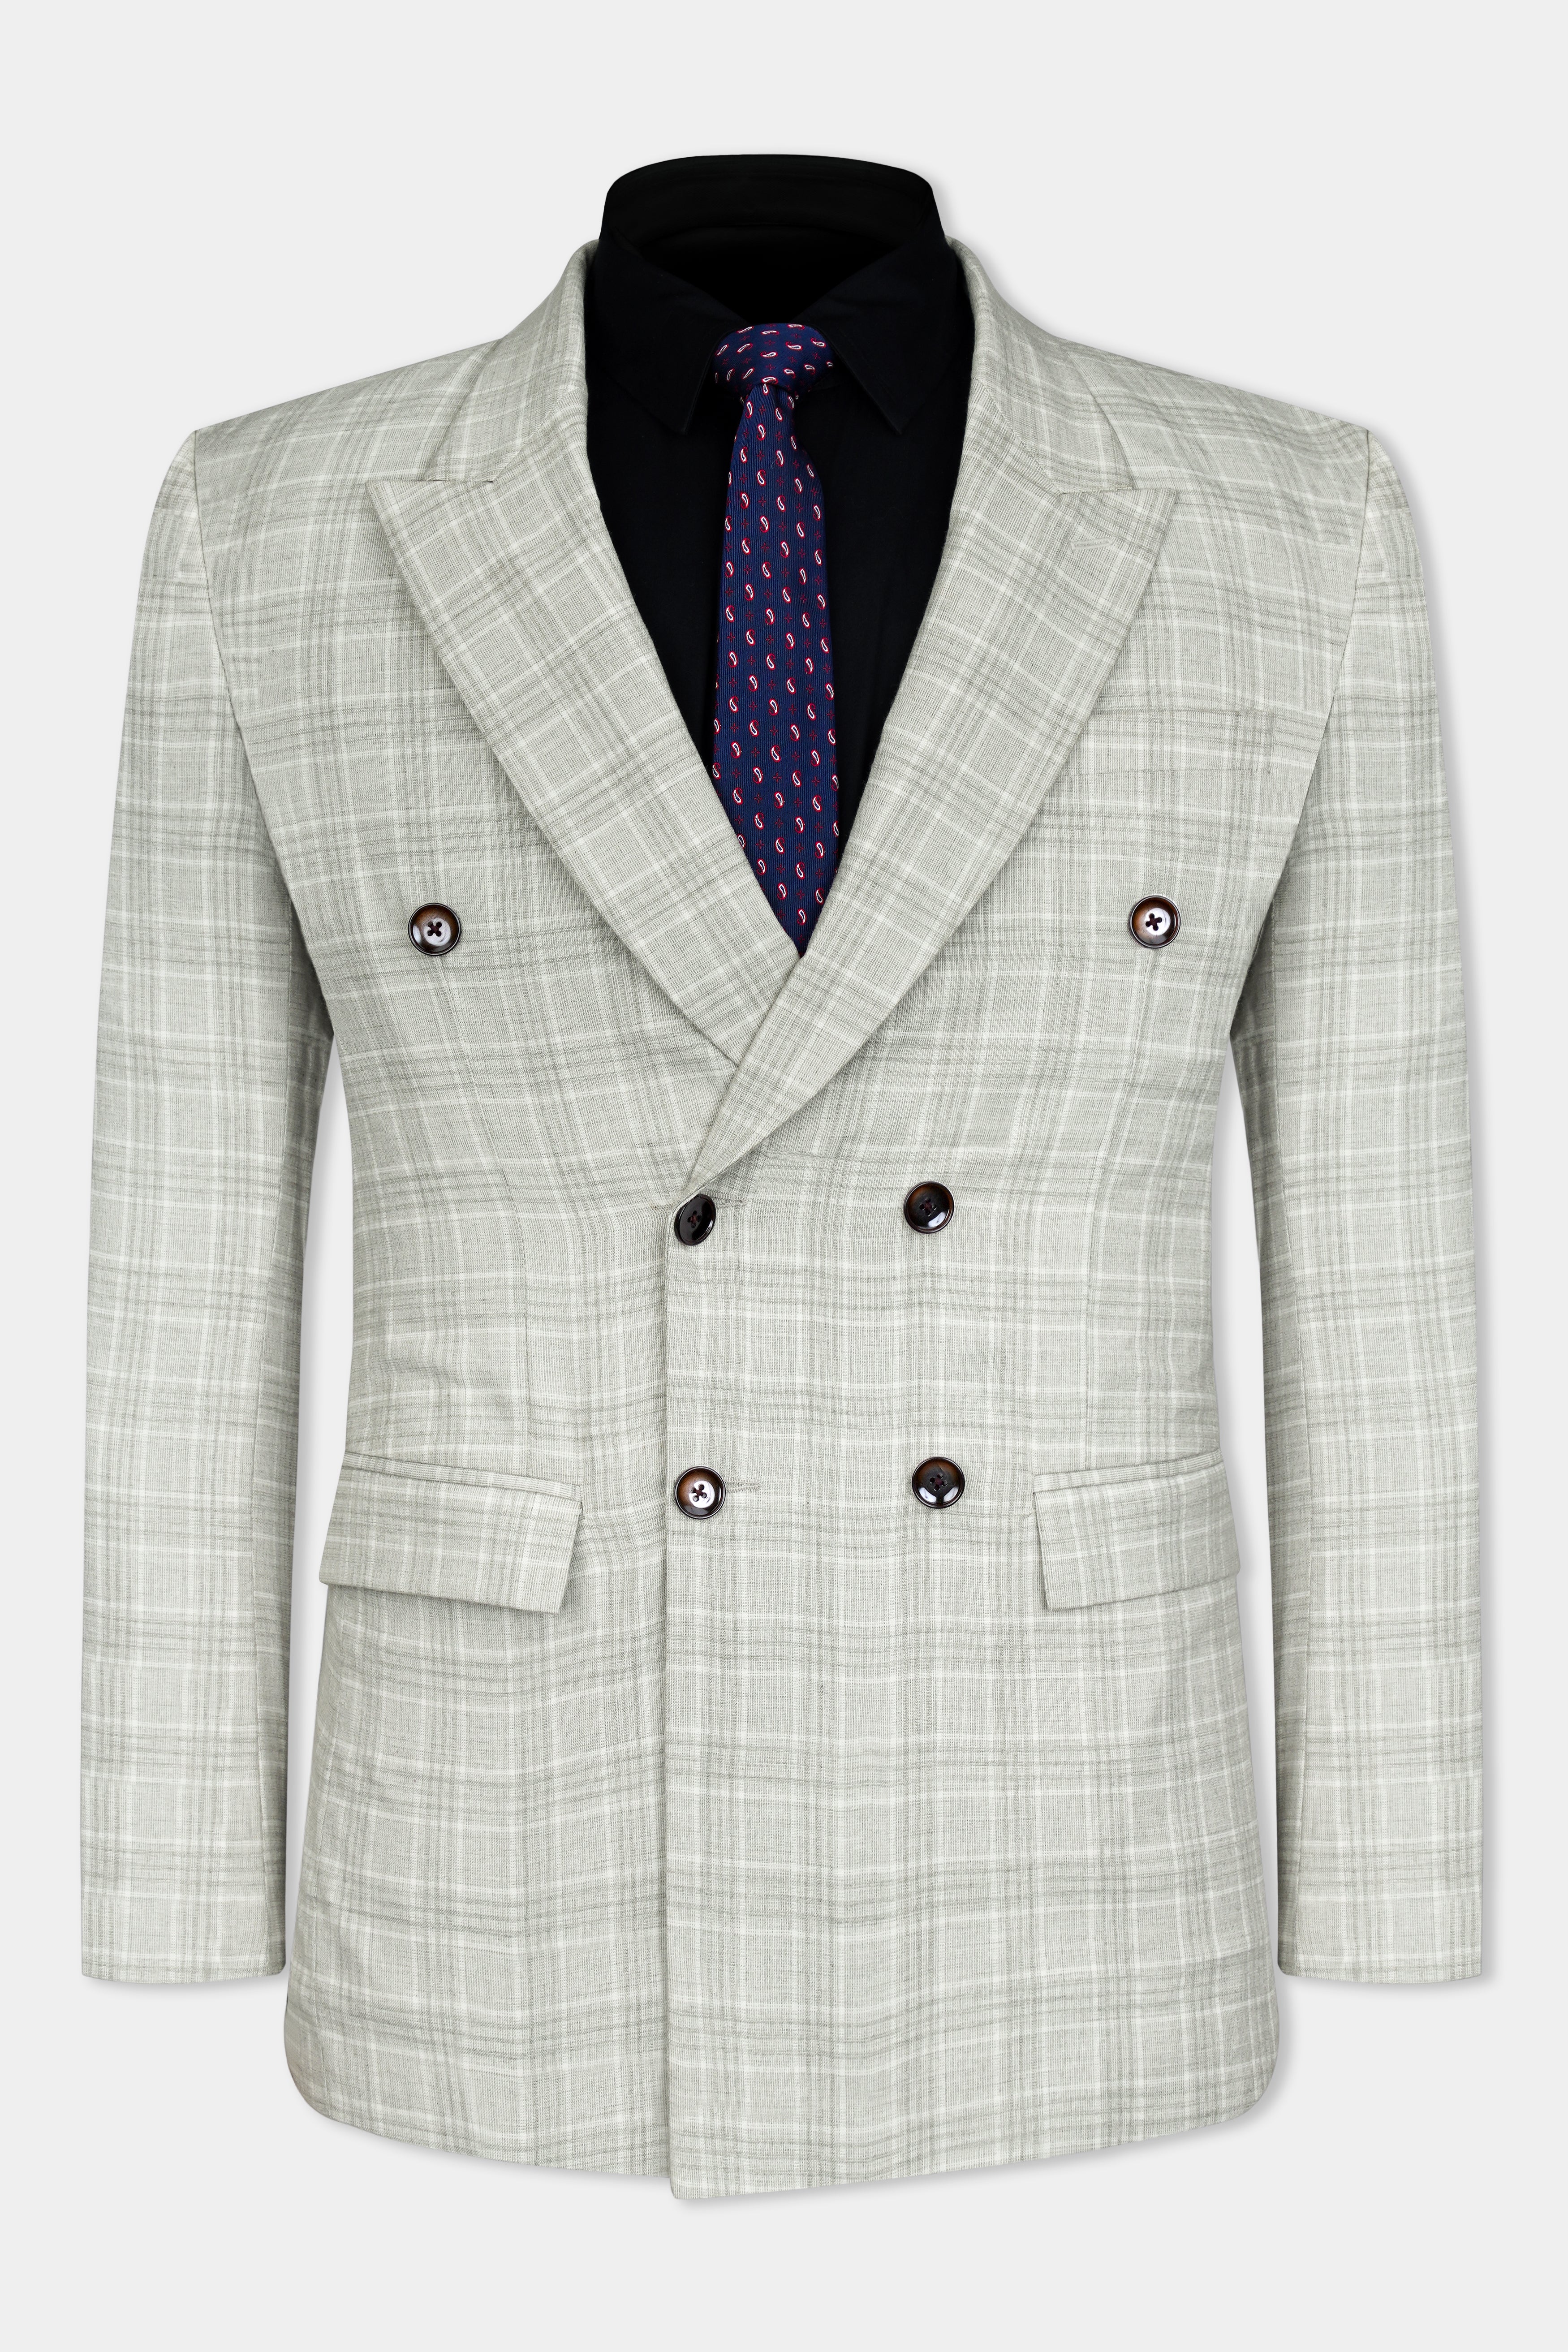 Cloud Gray Plaid Wool Rich Double Breasted Blazer BL3109-DB-36, BL3109-DB-38, BL3109-DB-40, BL3109-DB-42, BL3109-DB-44, BL3109-DB-46, BL3109-DB-48, BL3109-DB-50, BL3109-DB-52, BL3109-DB-54, BL3109-DB-56, BL3109-DB-58, BL3109-DB-60